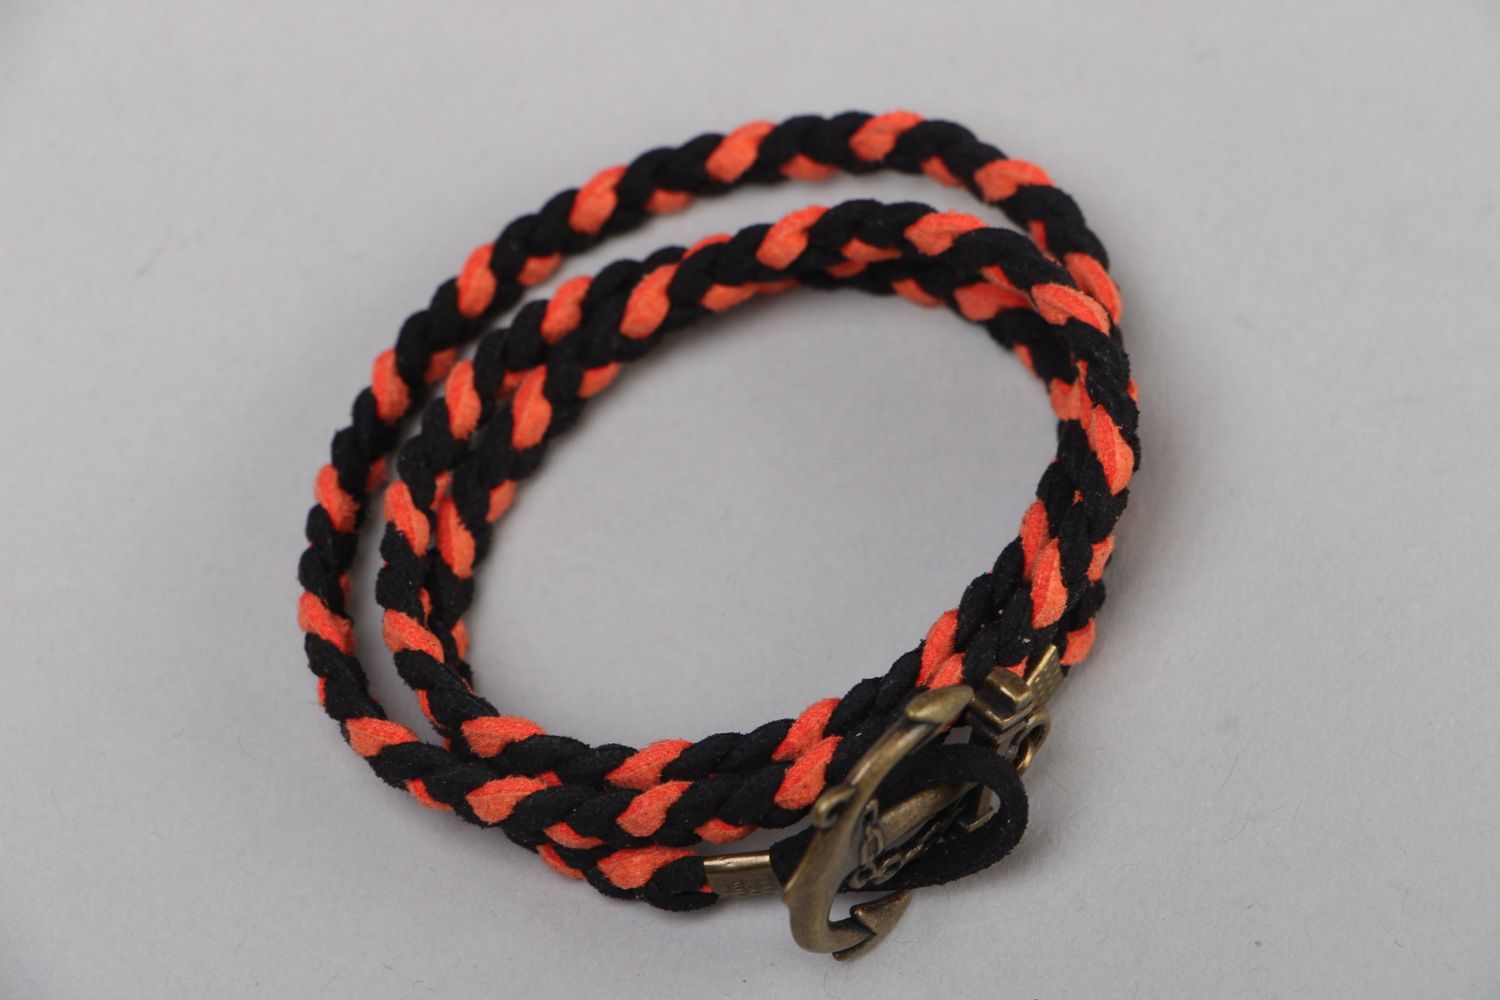 Handmade marine bracelet woven of faux suede cord of black and orange colors photo 2